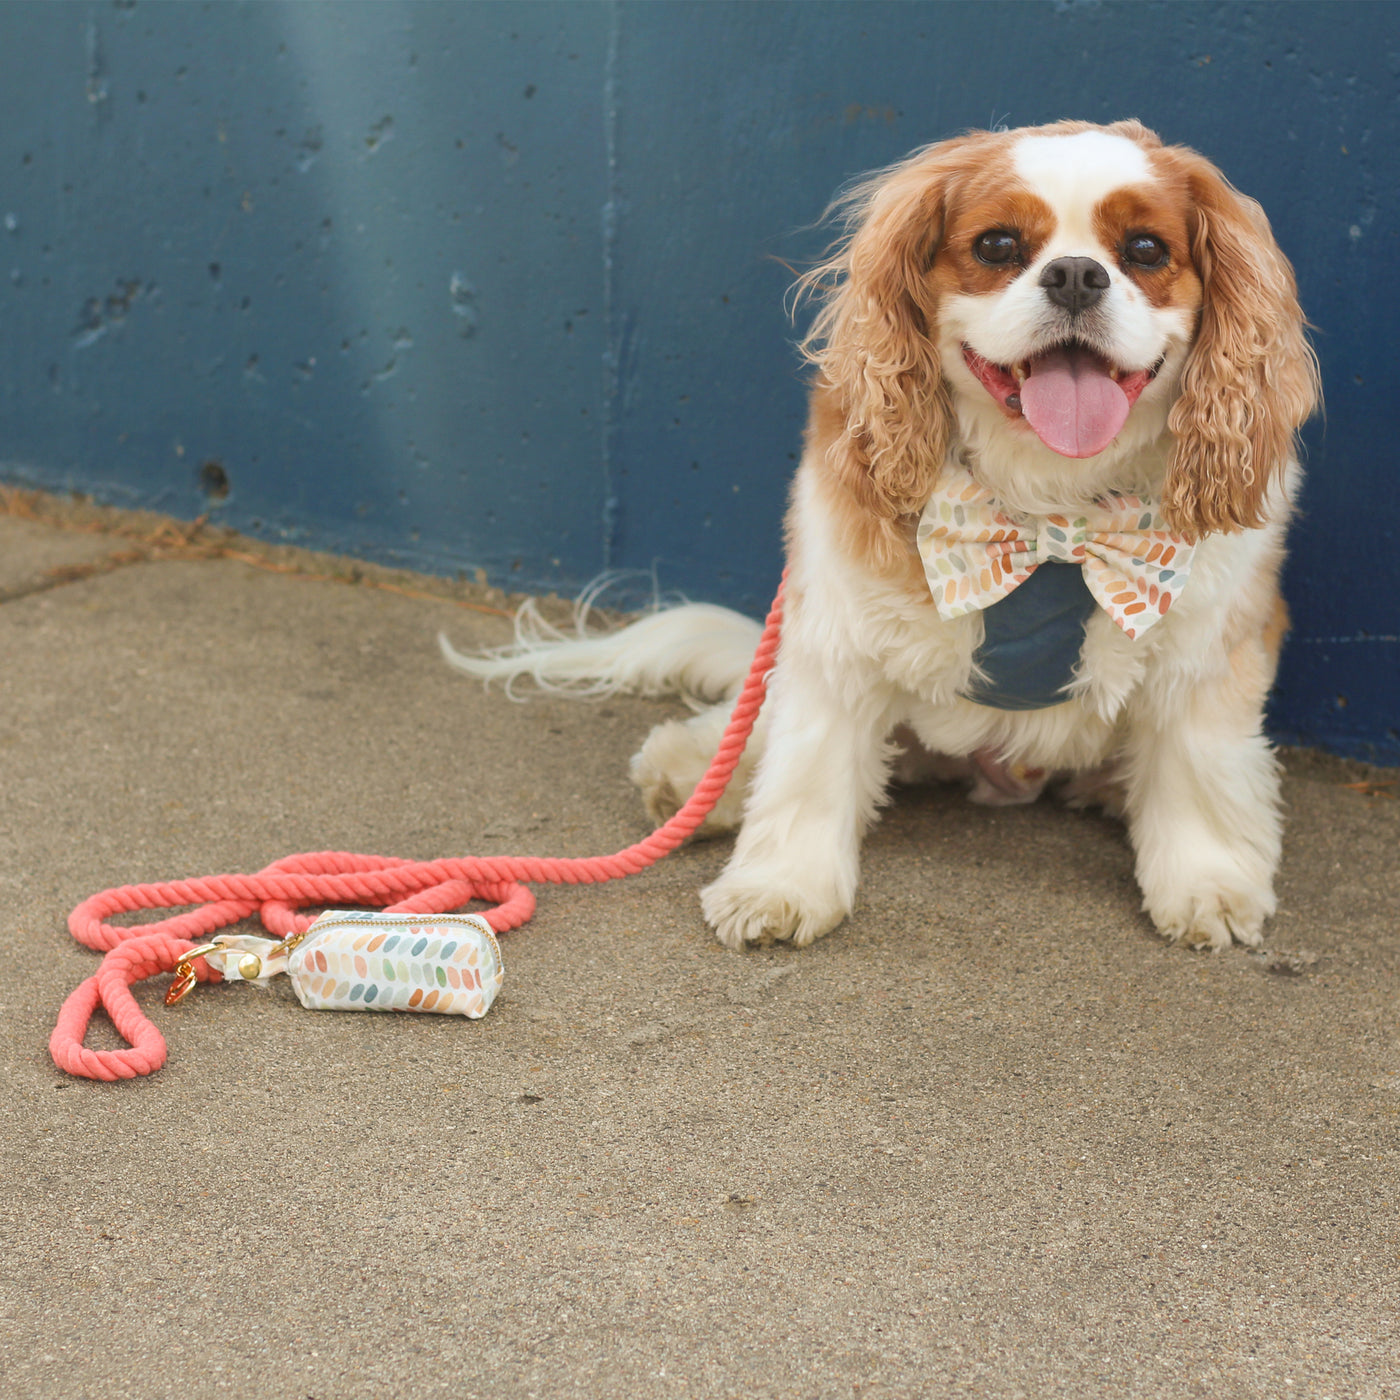 Cavalier King Charles Spaniel wearing blue velvet dog harness and watercolor dog bow tie with coral rope leash and watercolor dog poop bag holder on sidewalk against blue wall